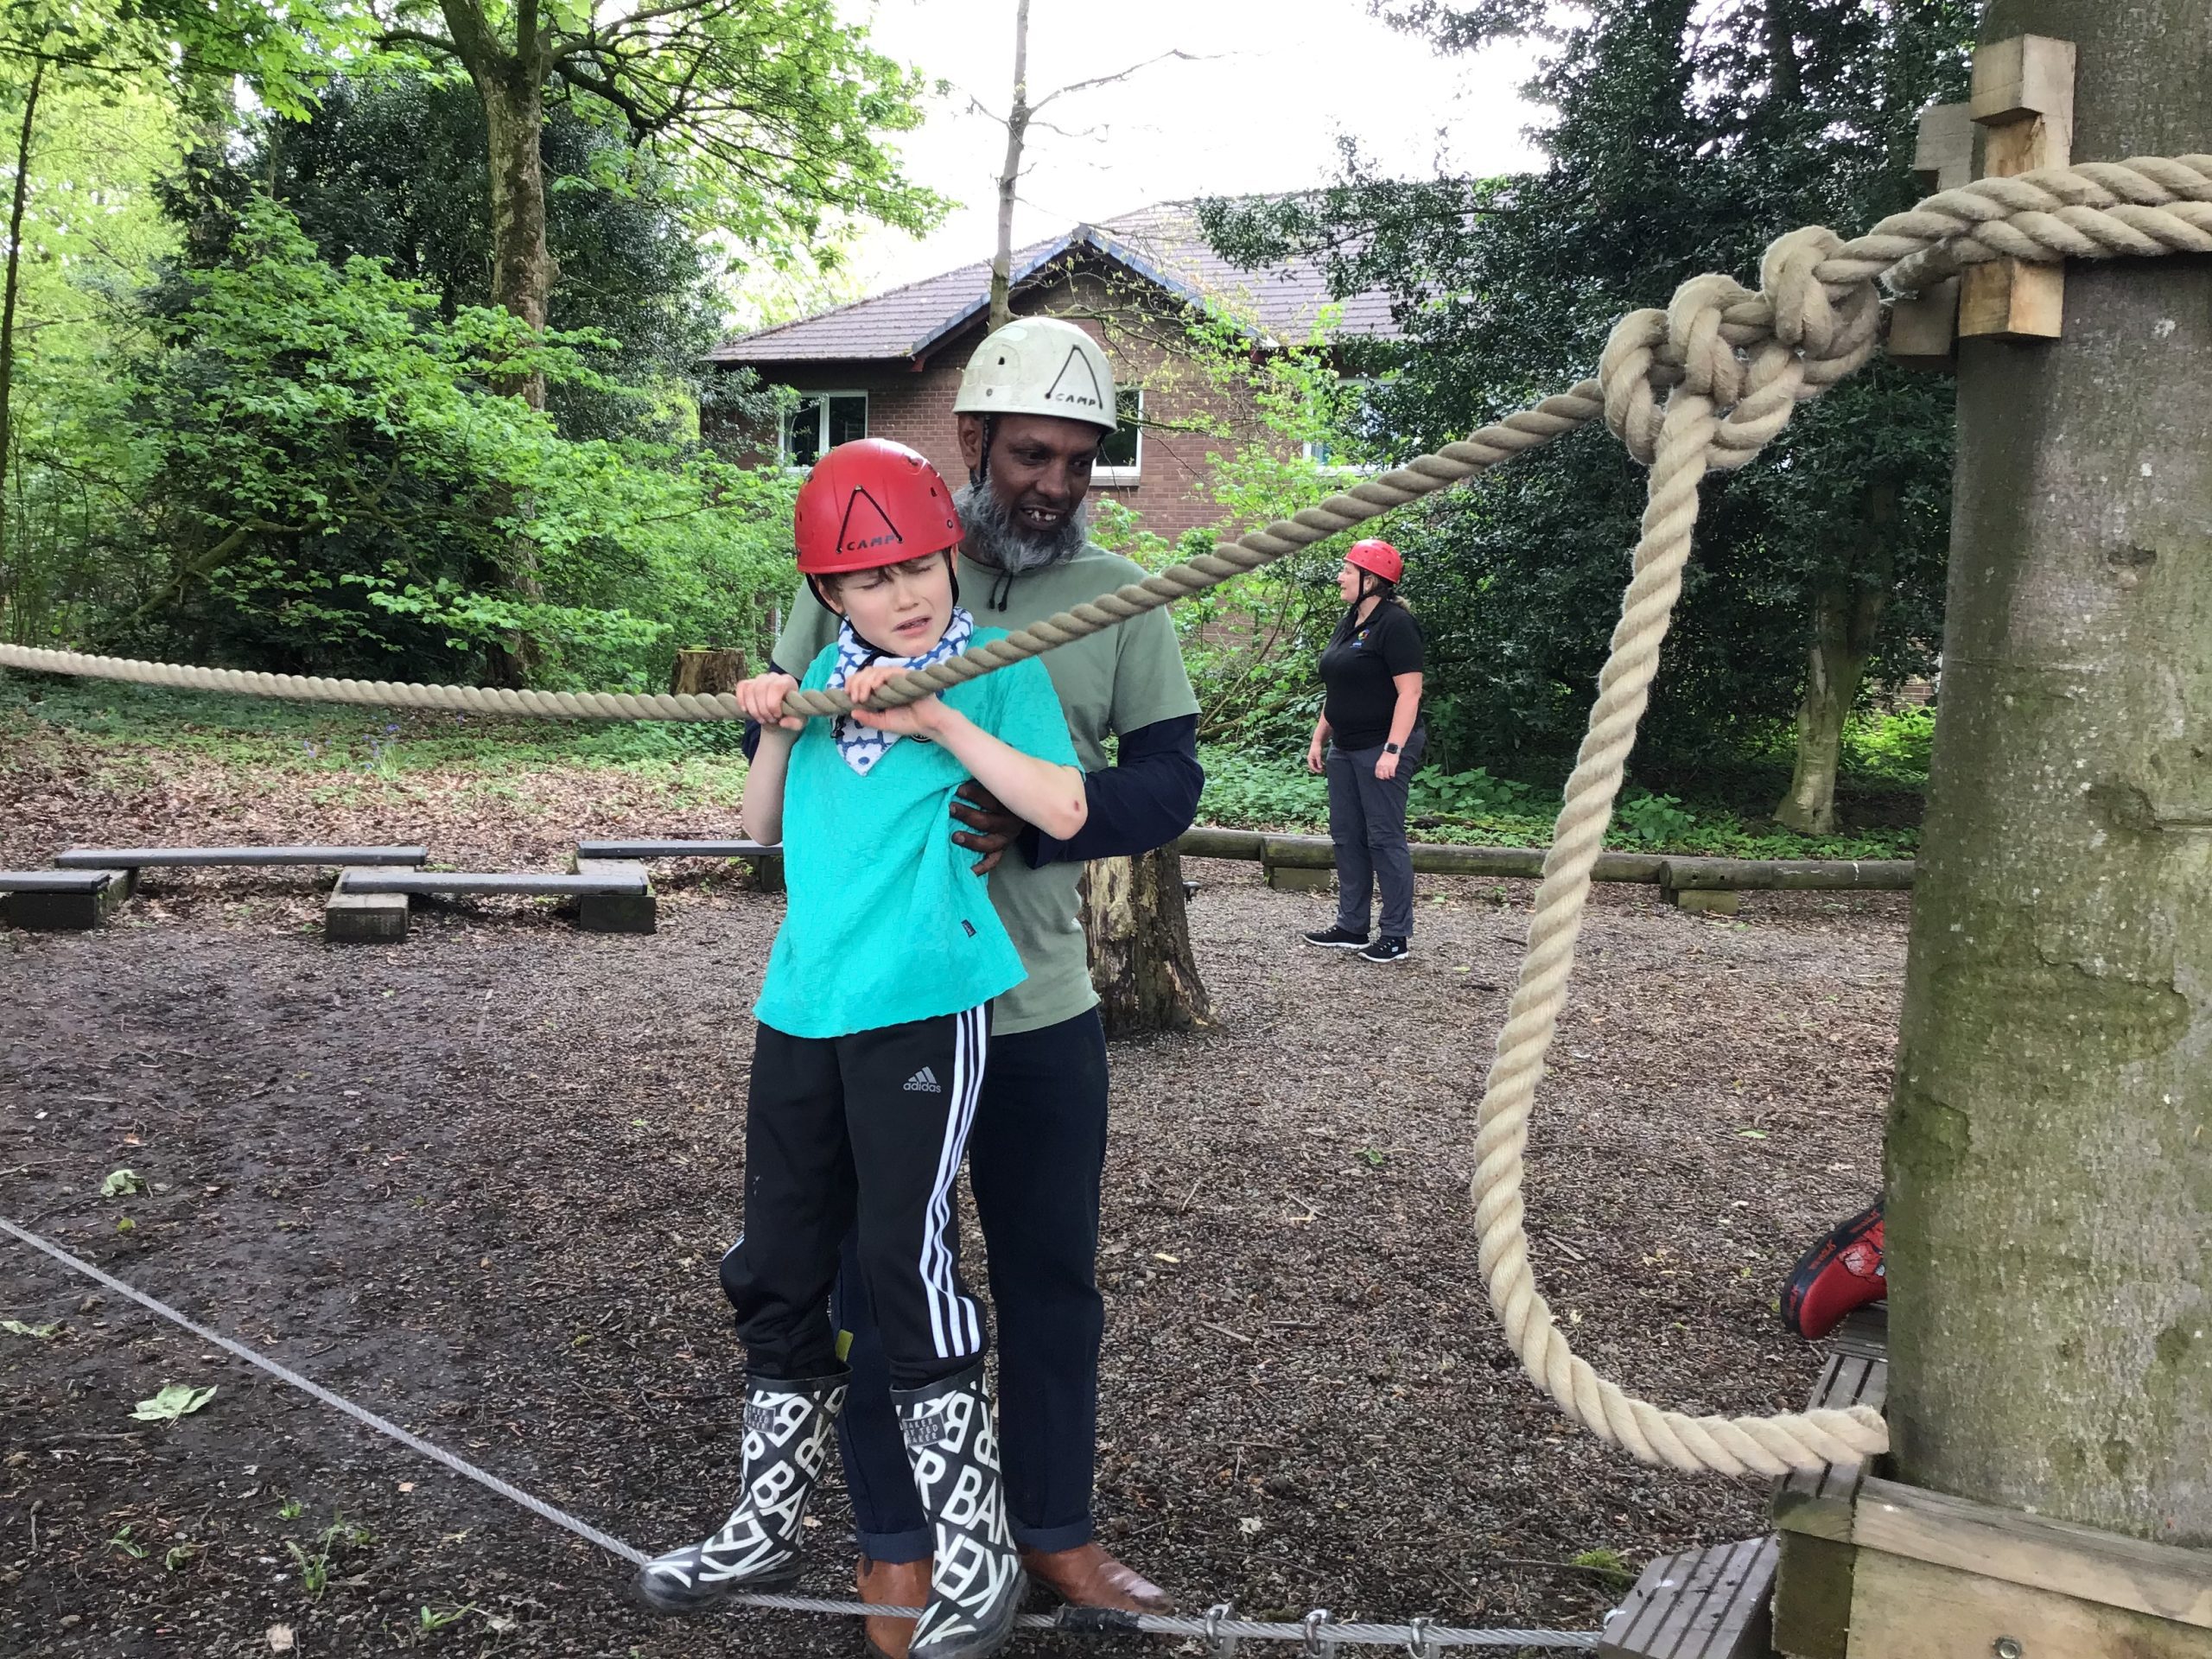 Student being supported by a staff member as they enjoy the obstacle course